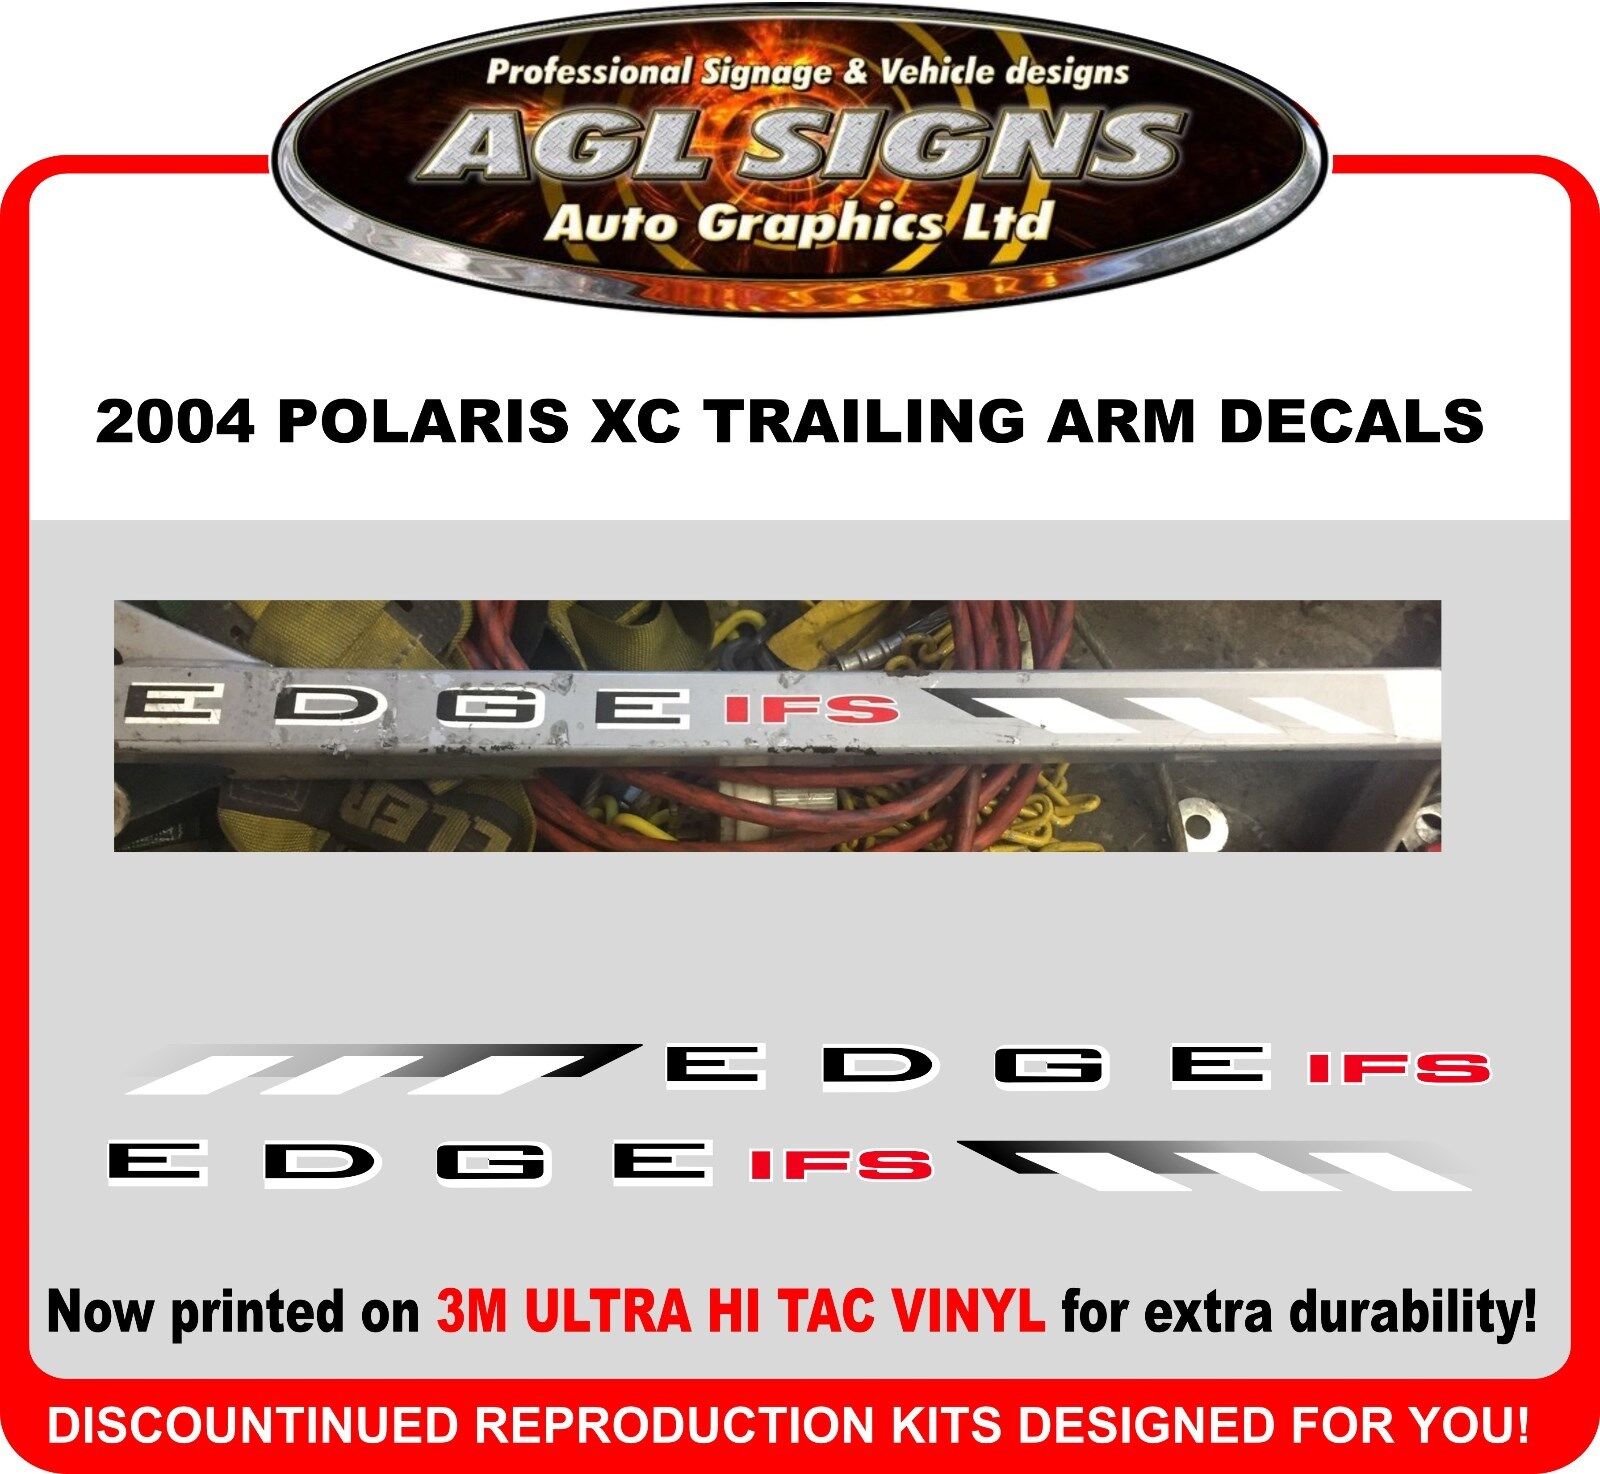 2004 Polaris Xc Edge Ifs Reproduction Trailing Arms Decals